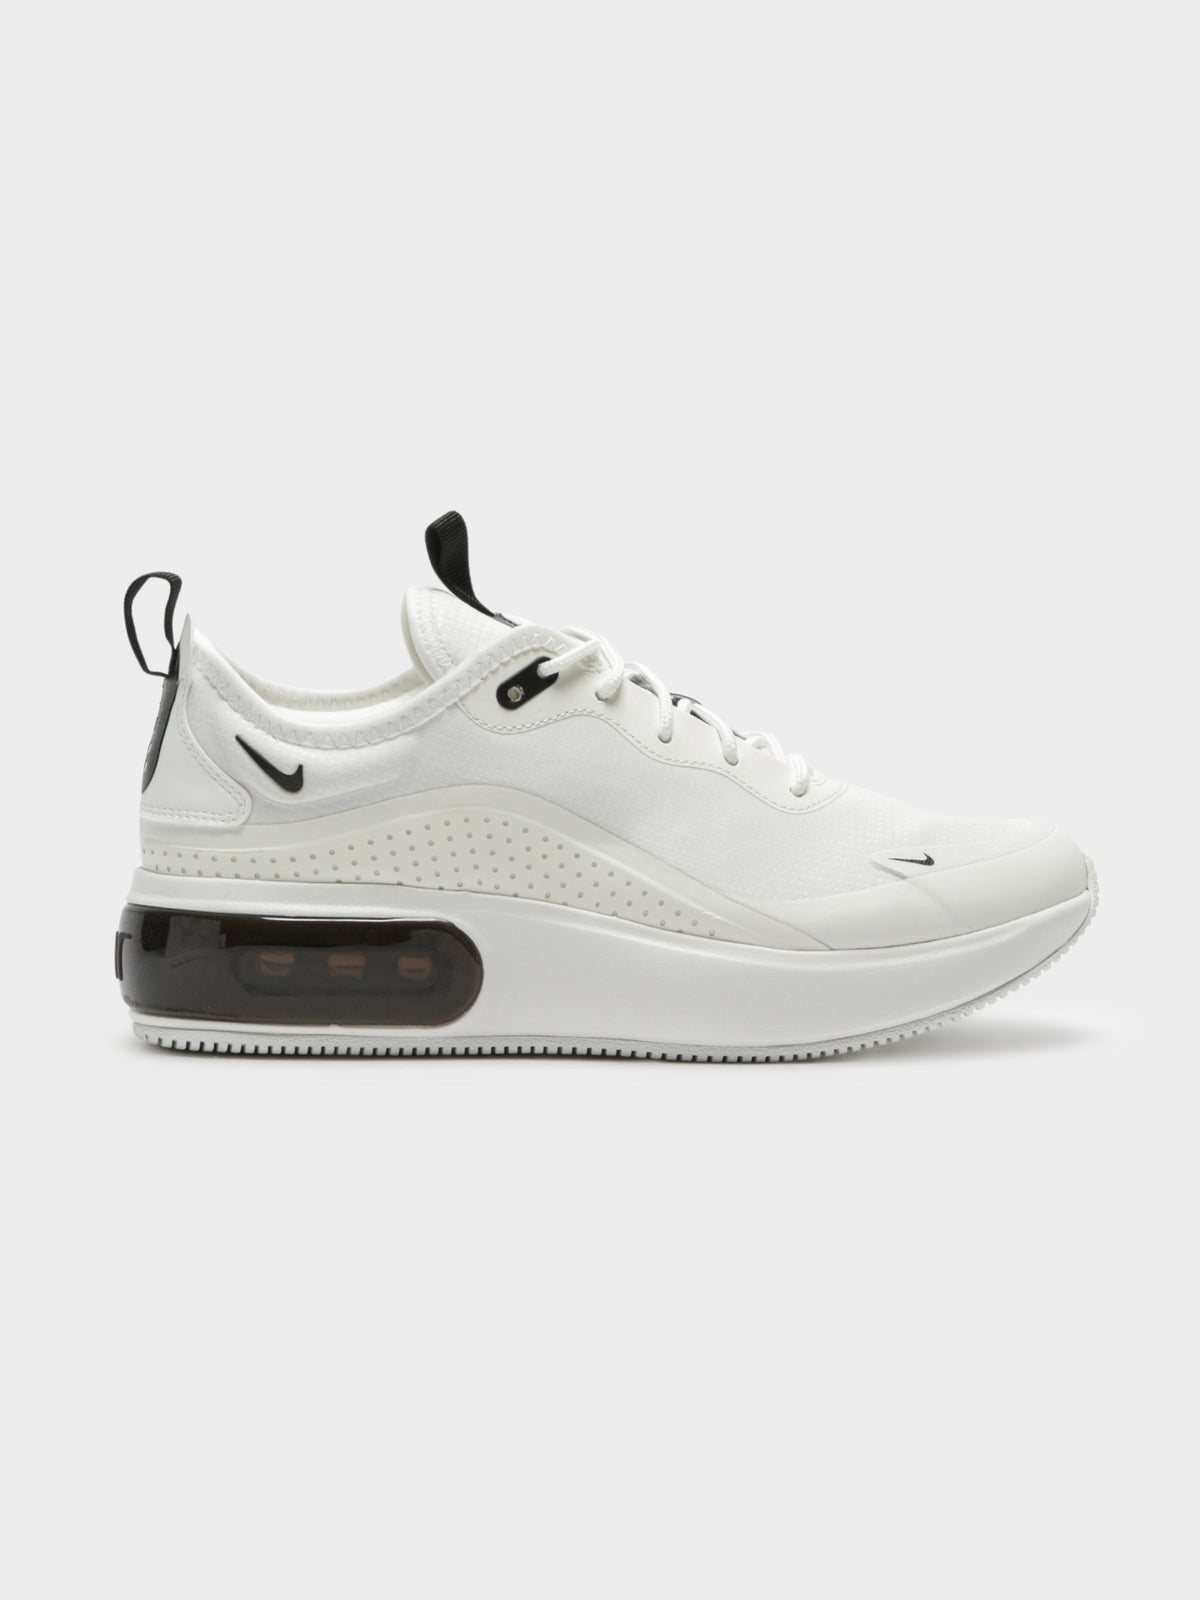 Womens Air Max Dia Sneakers in Summit White &amp; Black